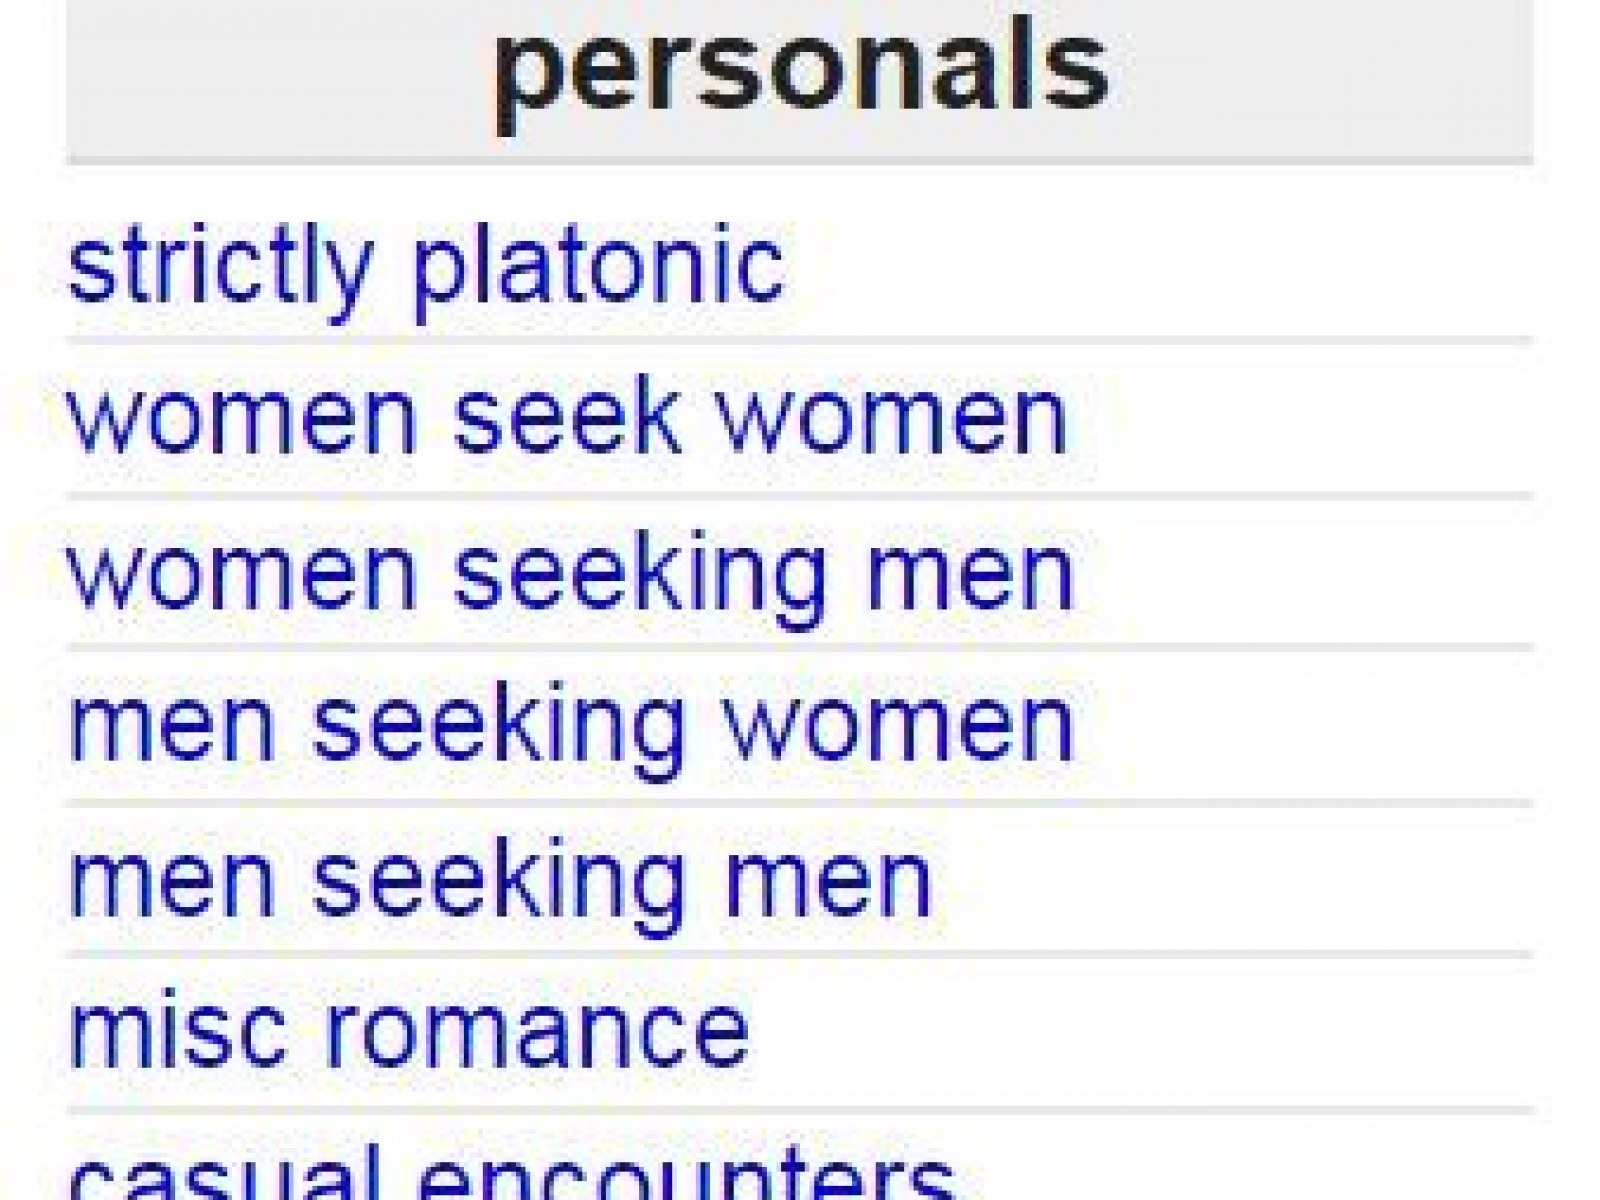 What is Craigslist personals? 